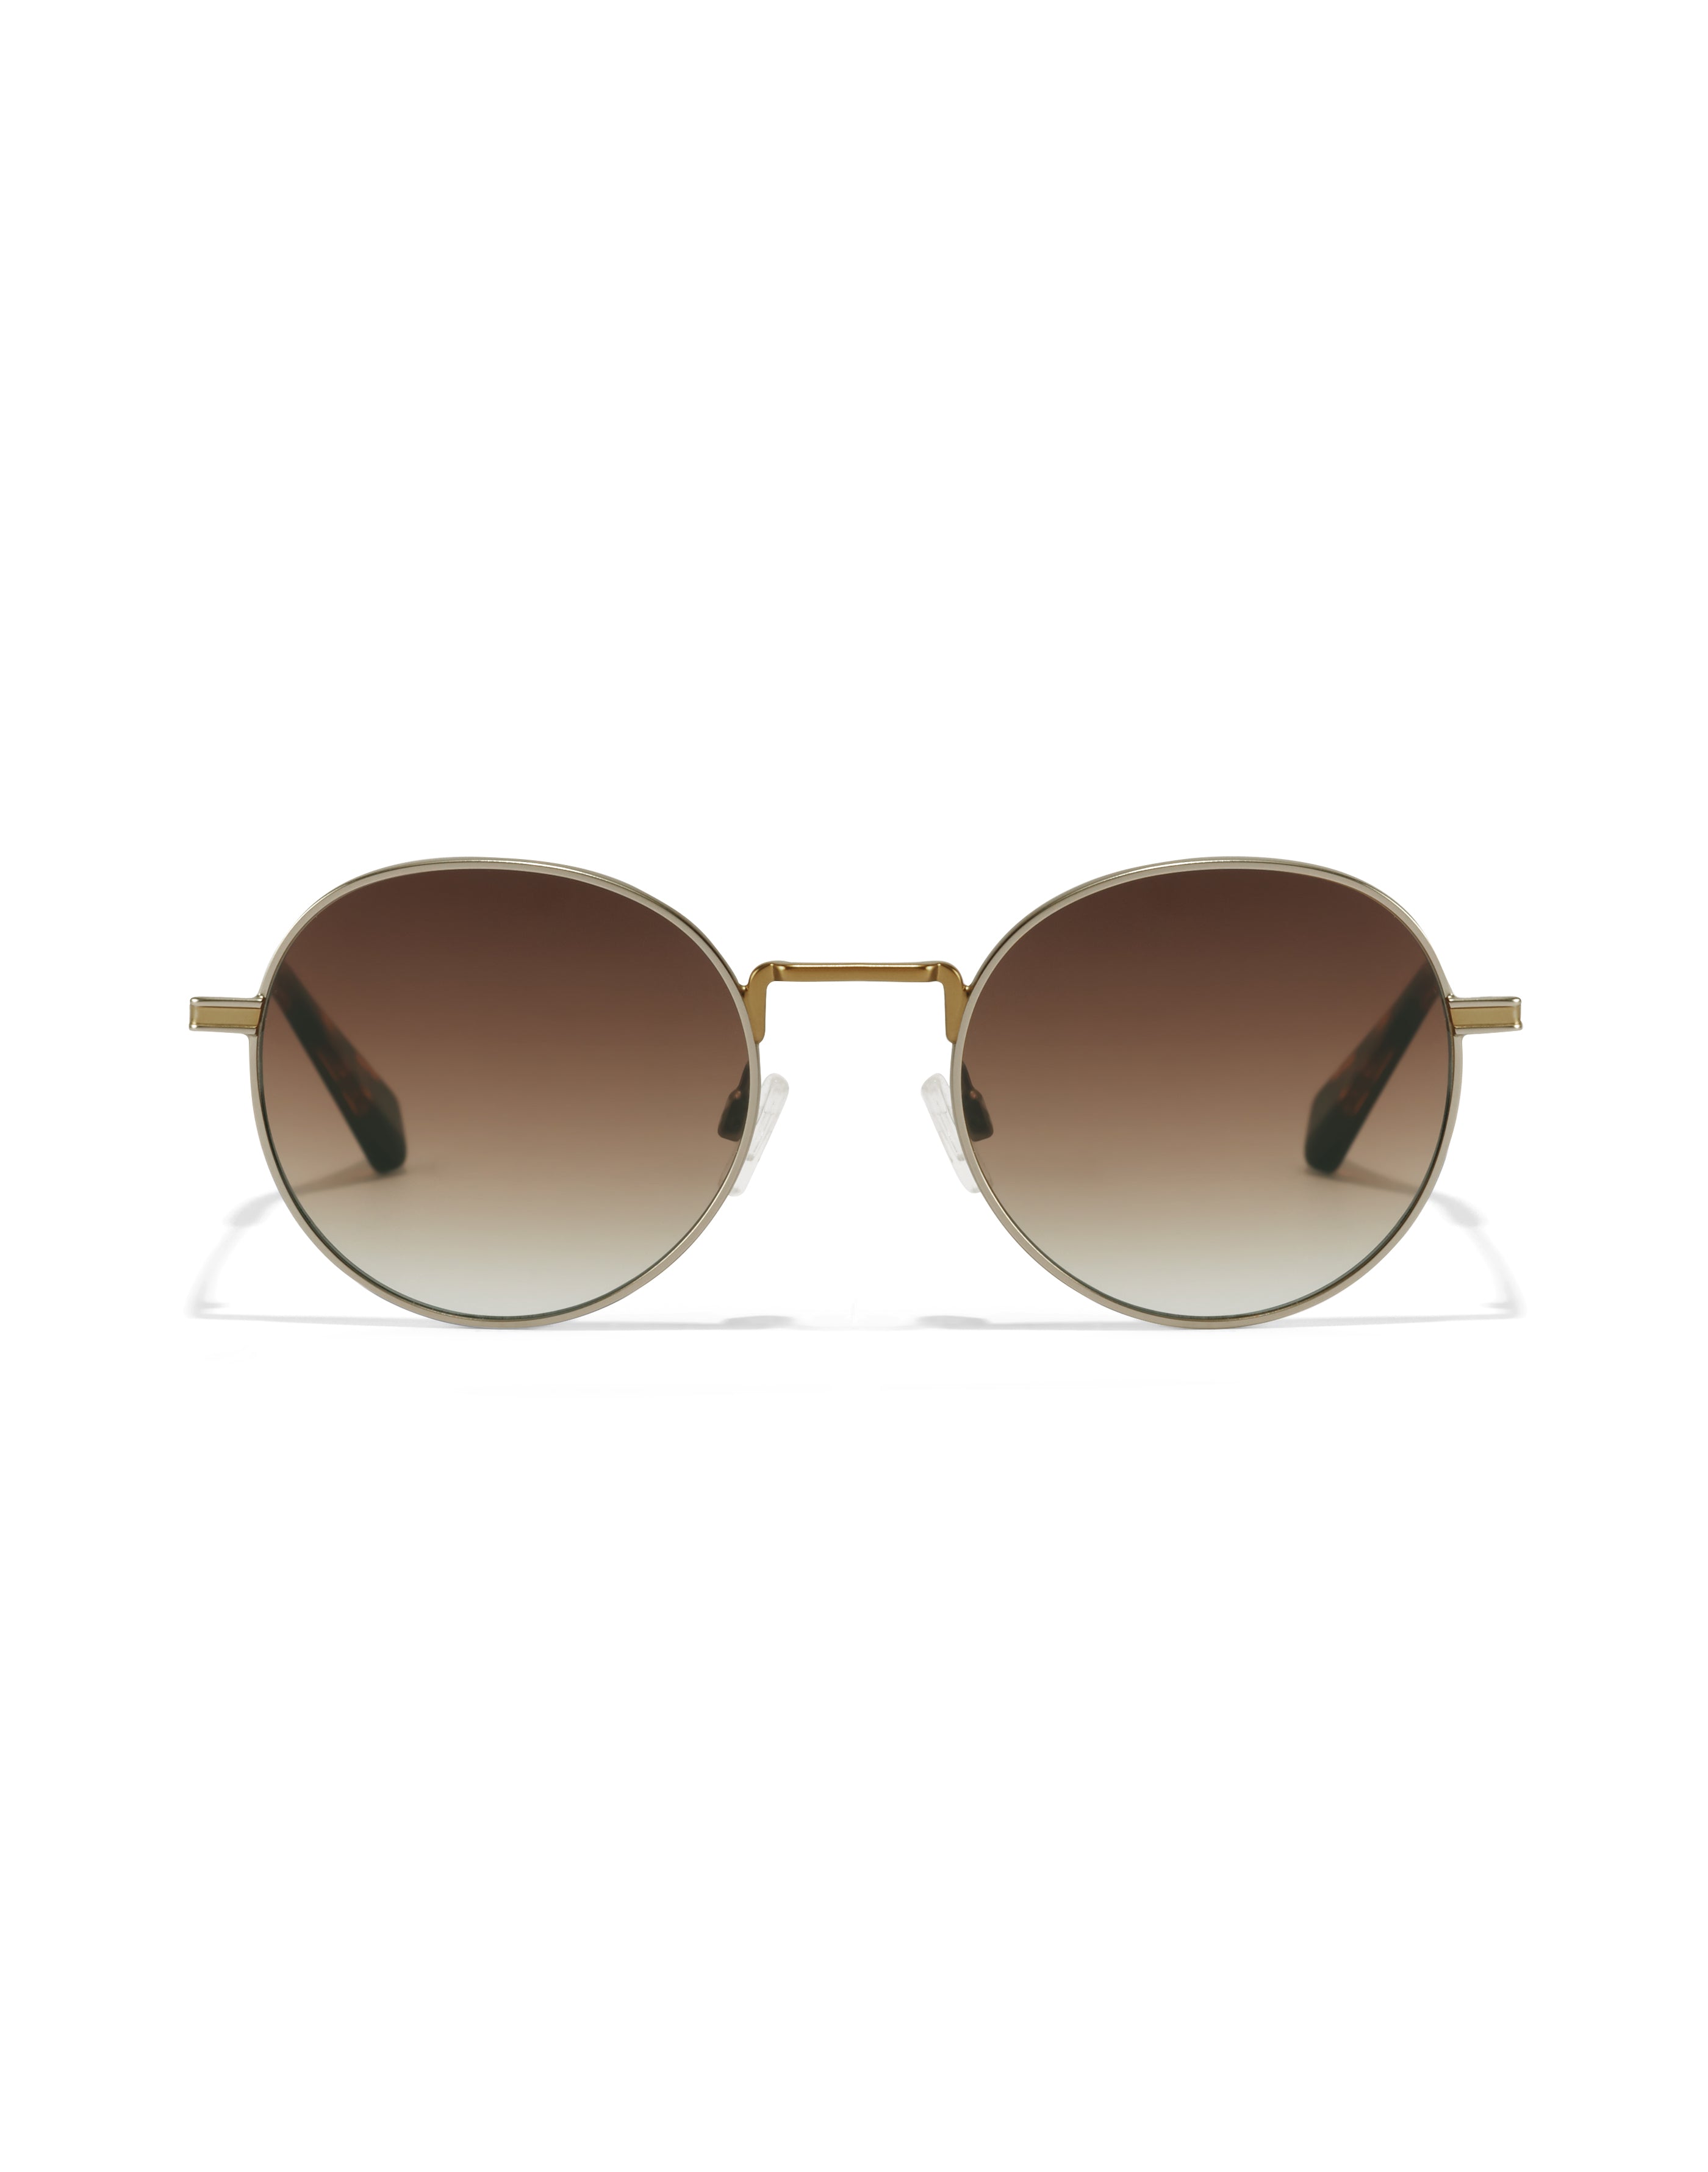 HAWKERS - MOMA Gold Havana For Men and Women UV400